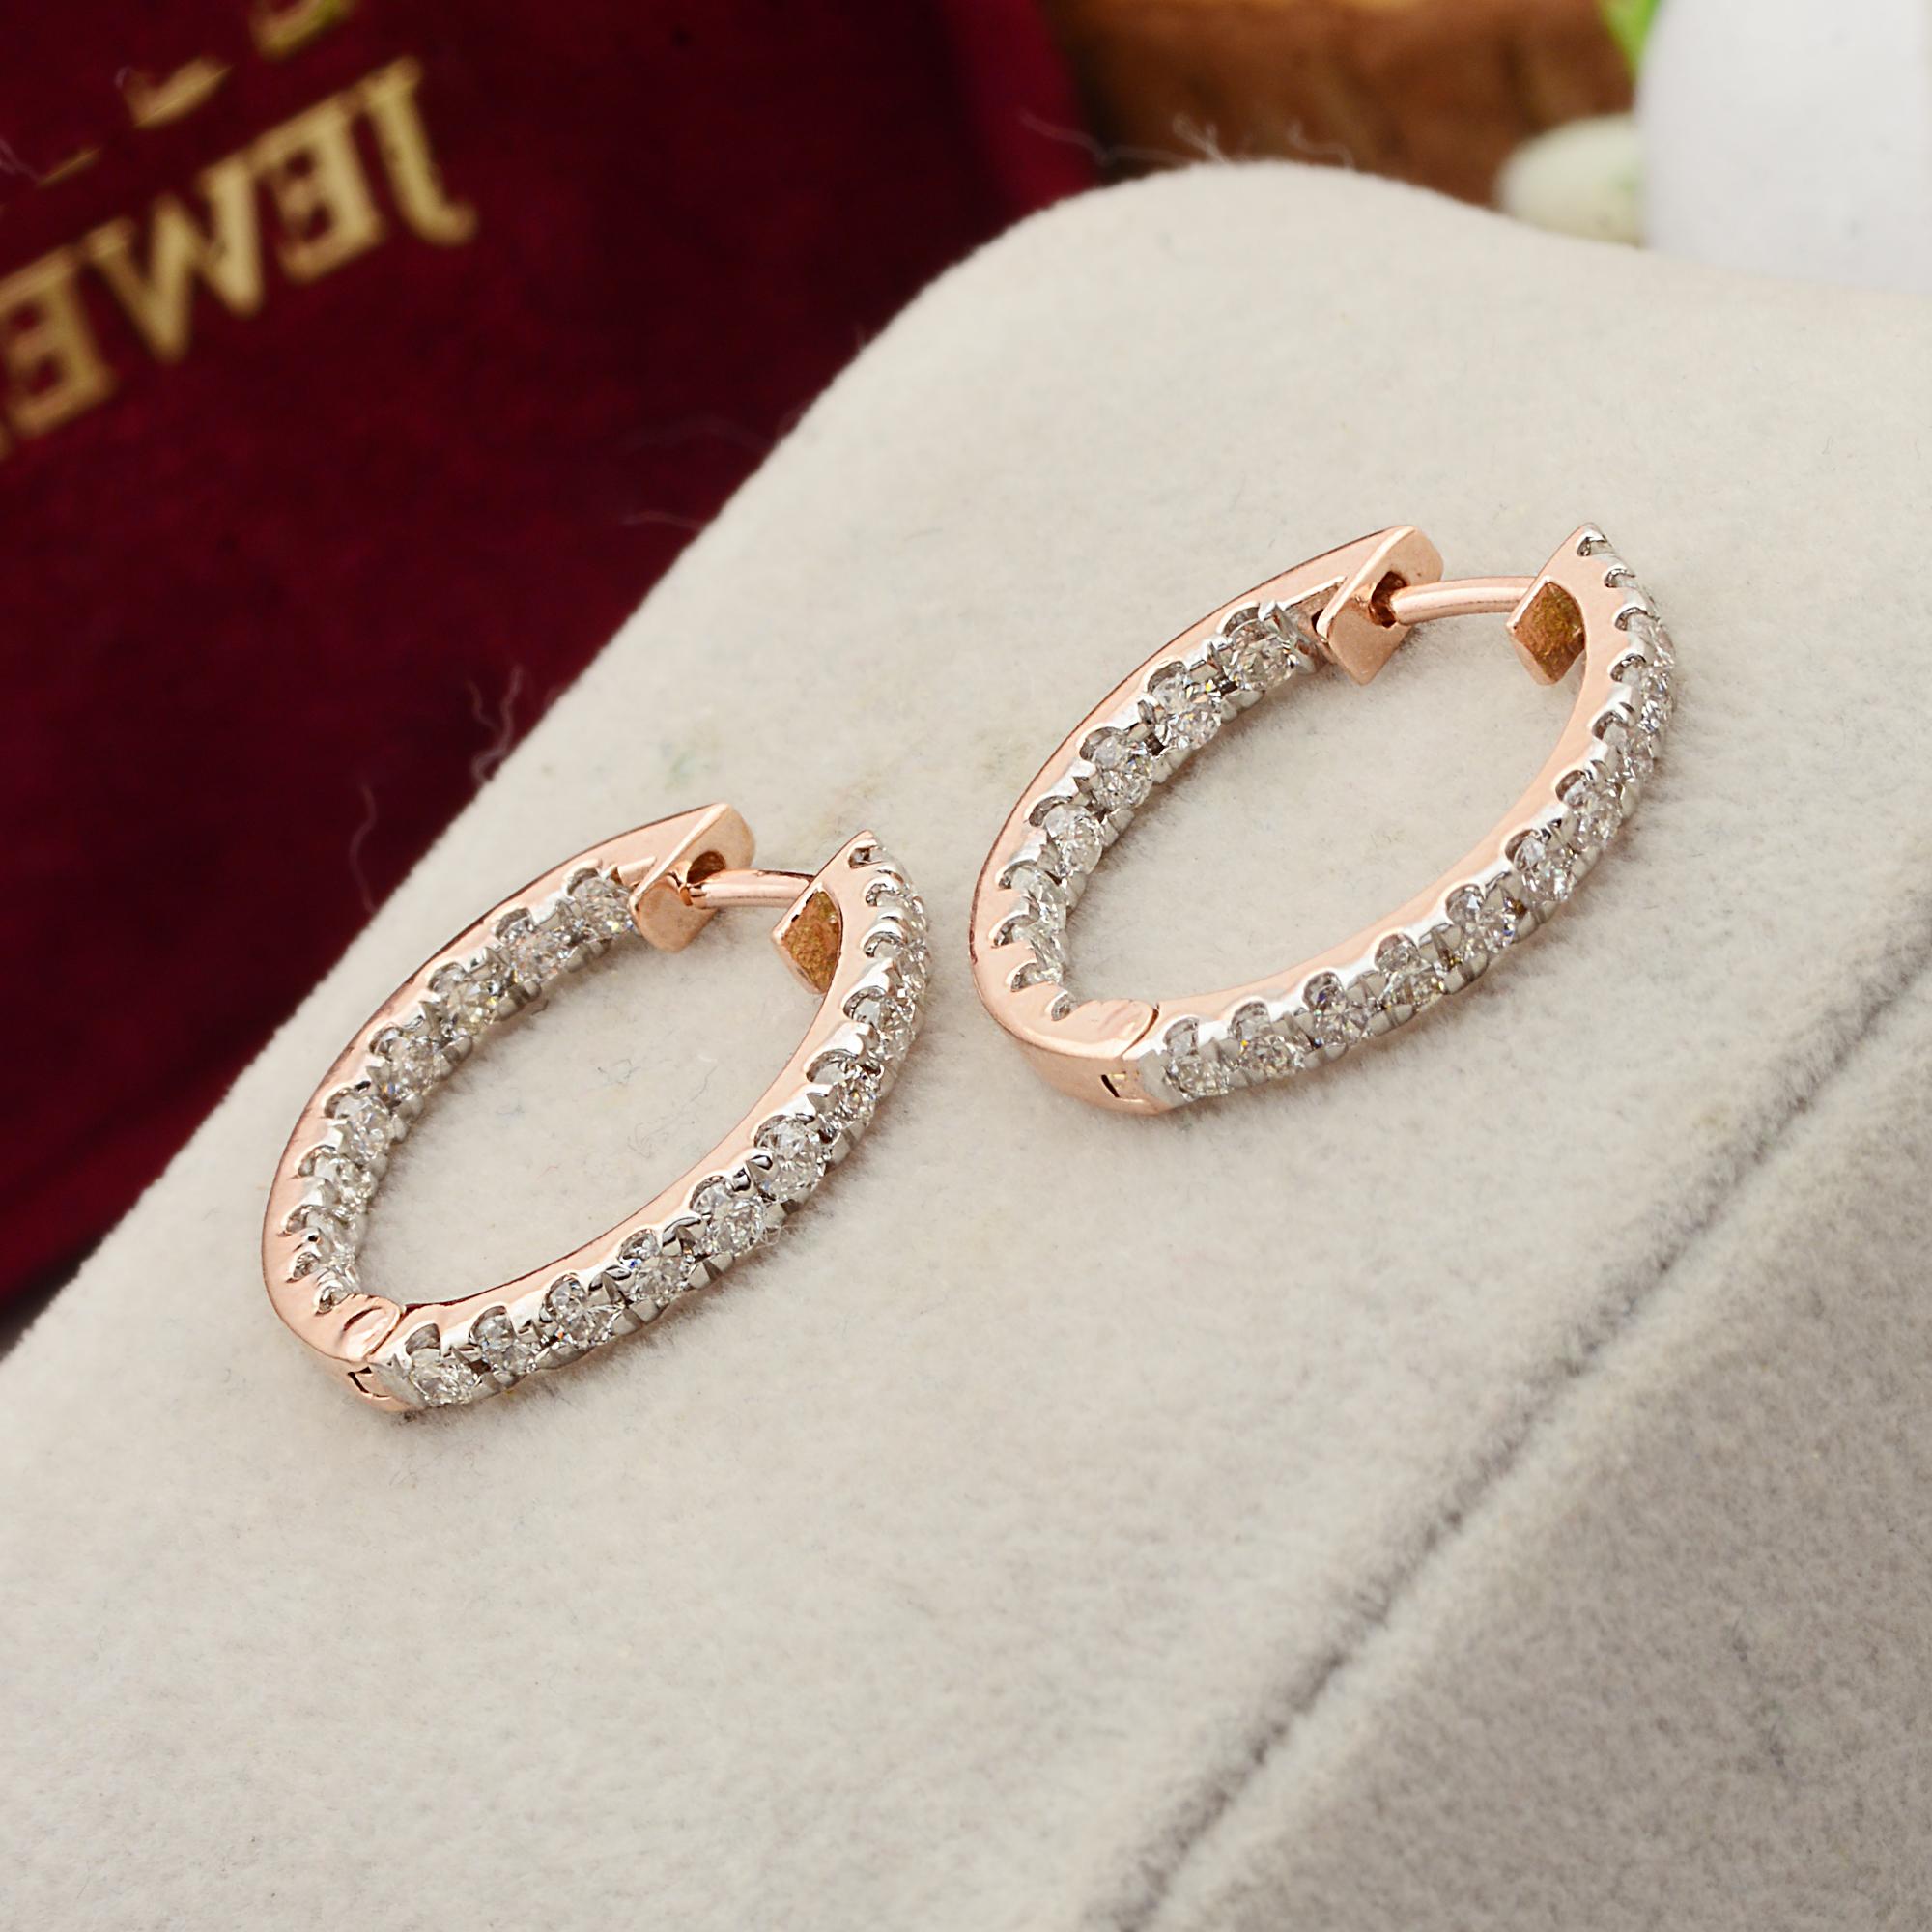 Modern 1.07 Carat SI Clarity HI Color Diamond Pave Hoop Earrings 10k Rose Gold Jewelry For Sale